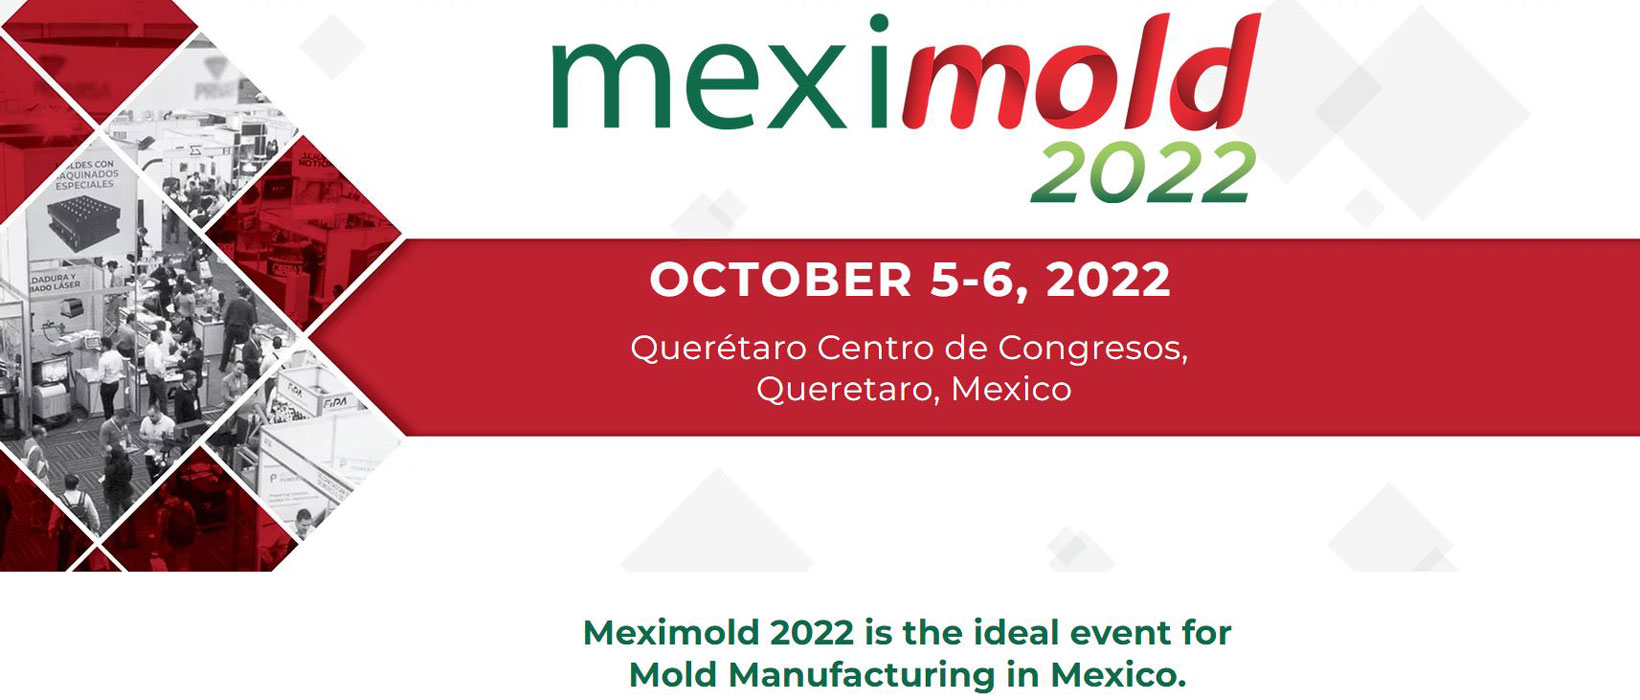  GH CRANES & COMPONENTS in the Meximold 2022 fair